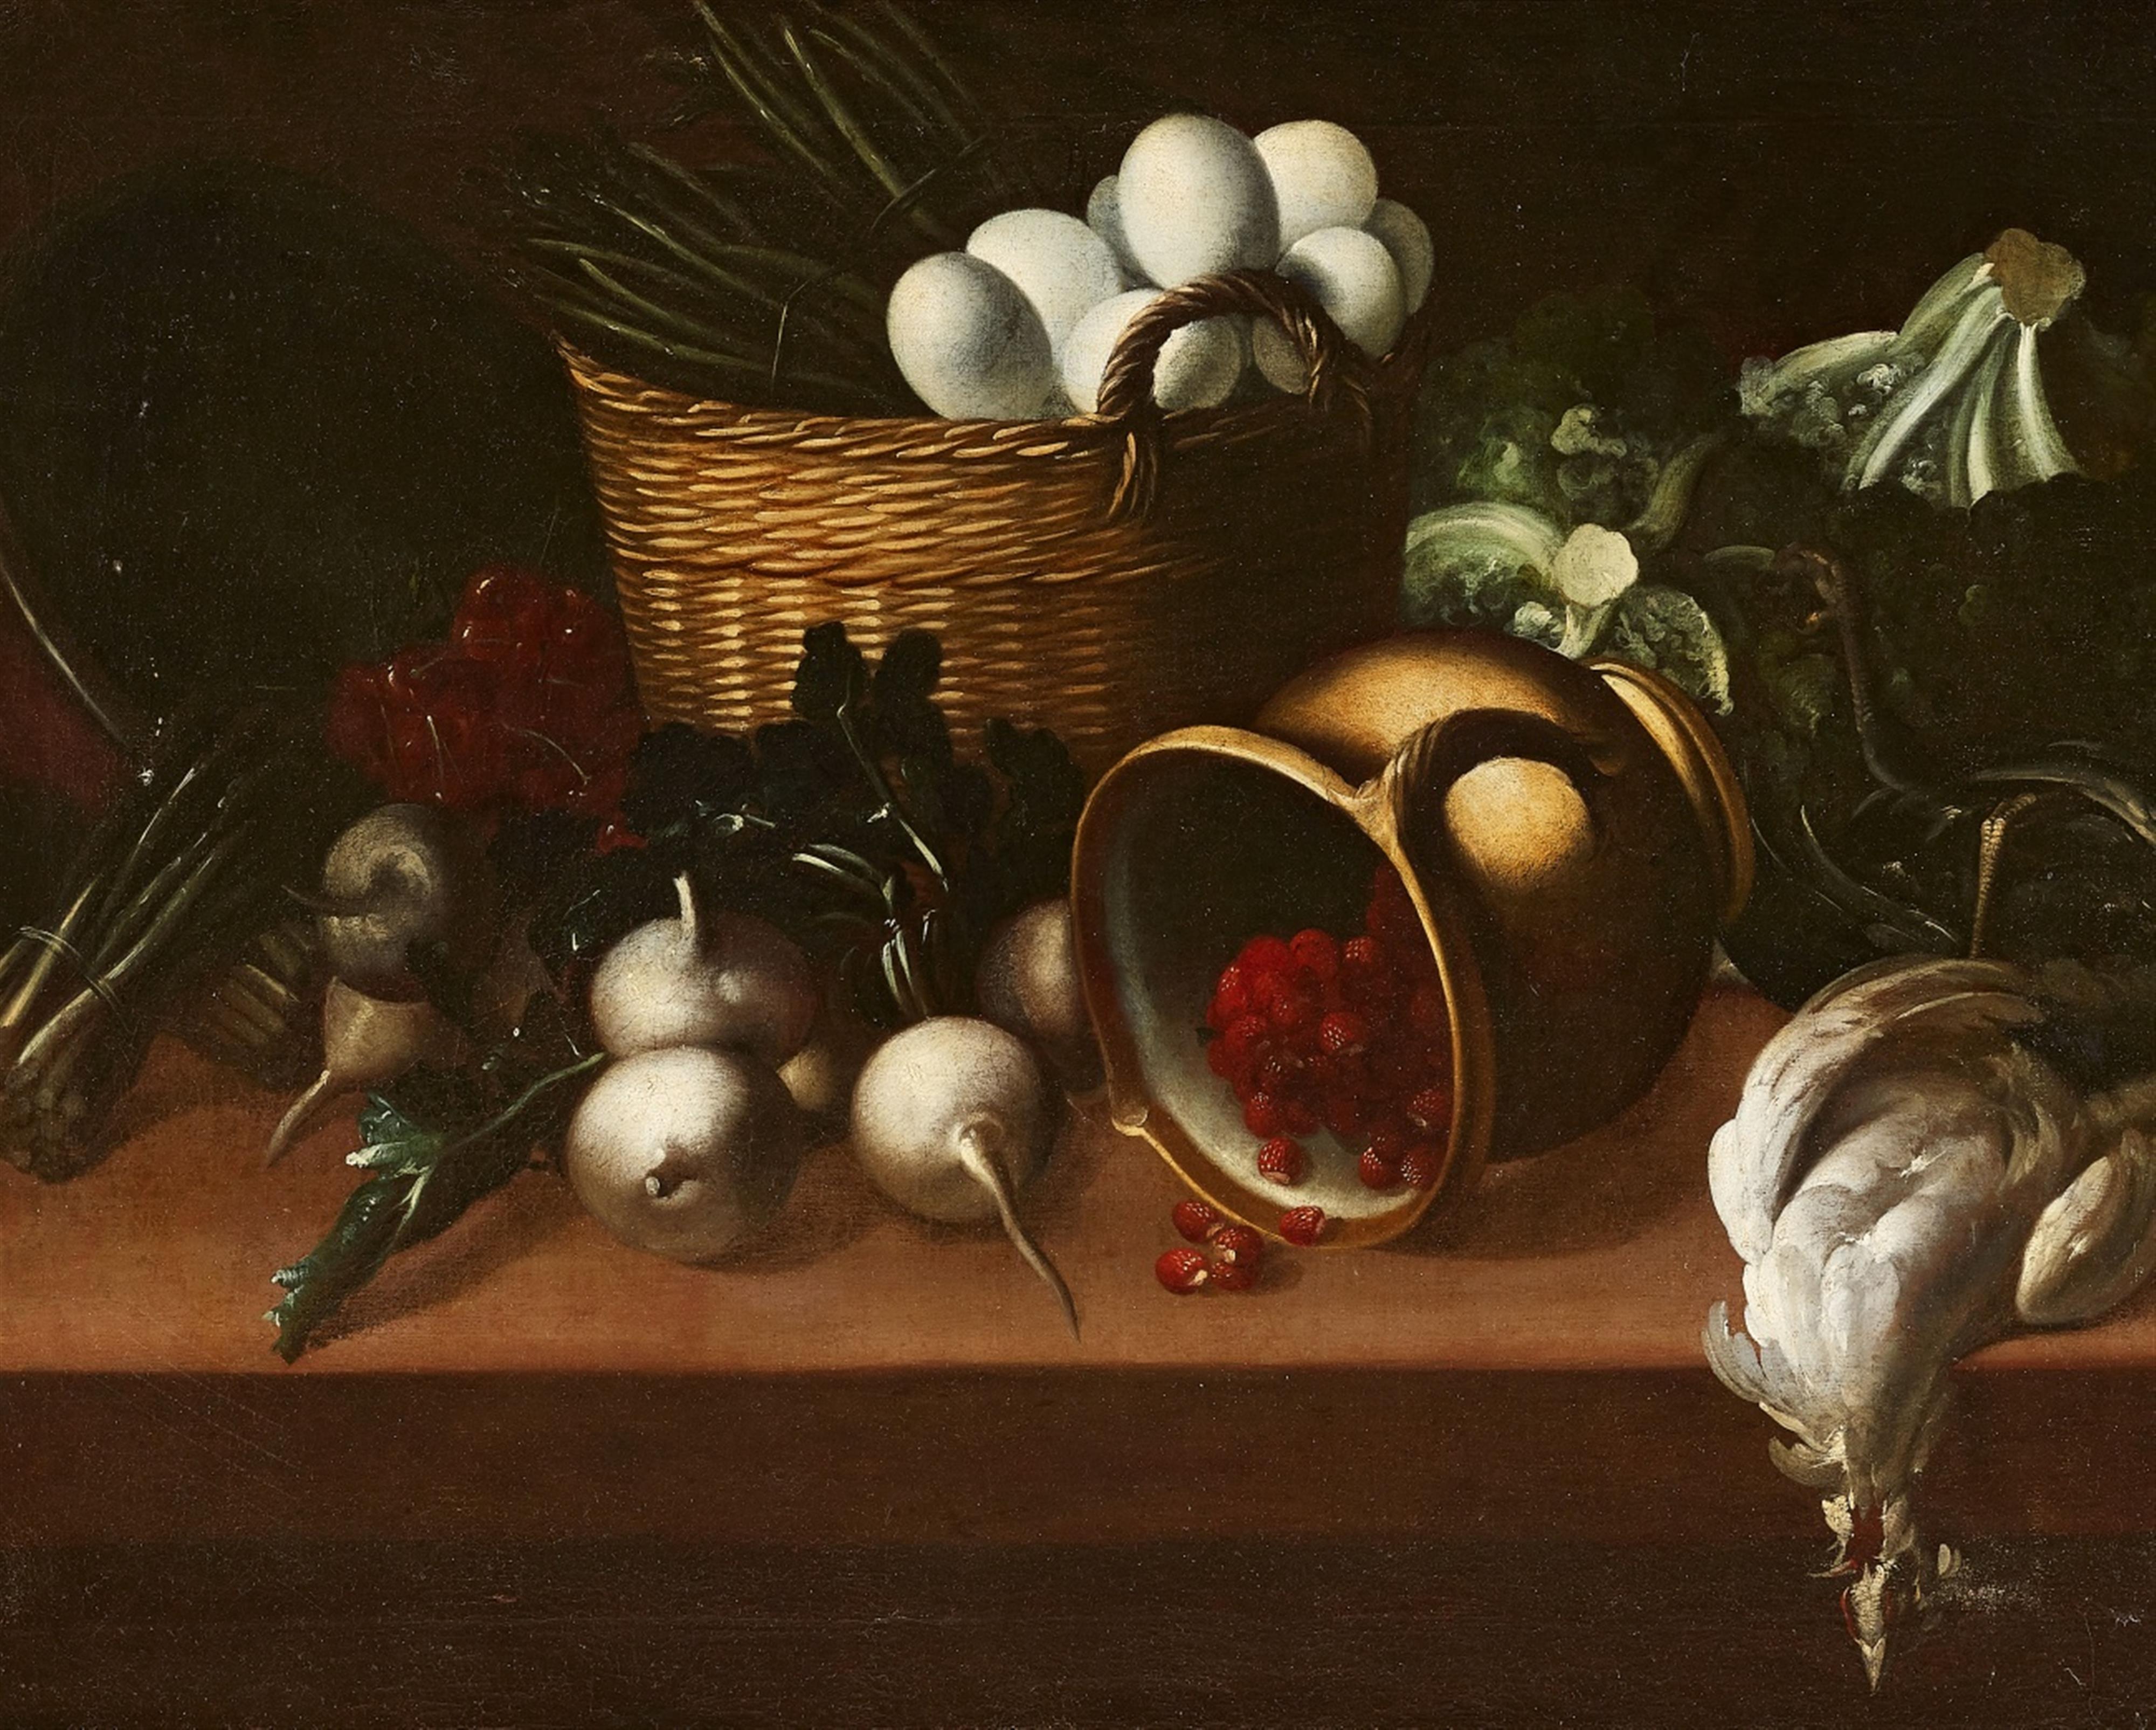 Spanish School 17th century - Still Life with a Basket, Fallen Jug, and Vegetables - image-1